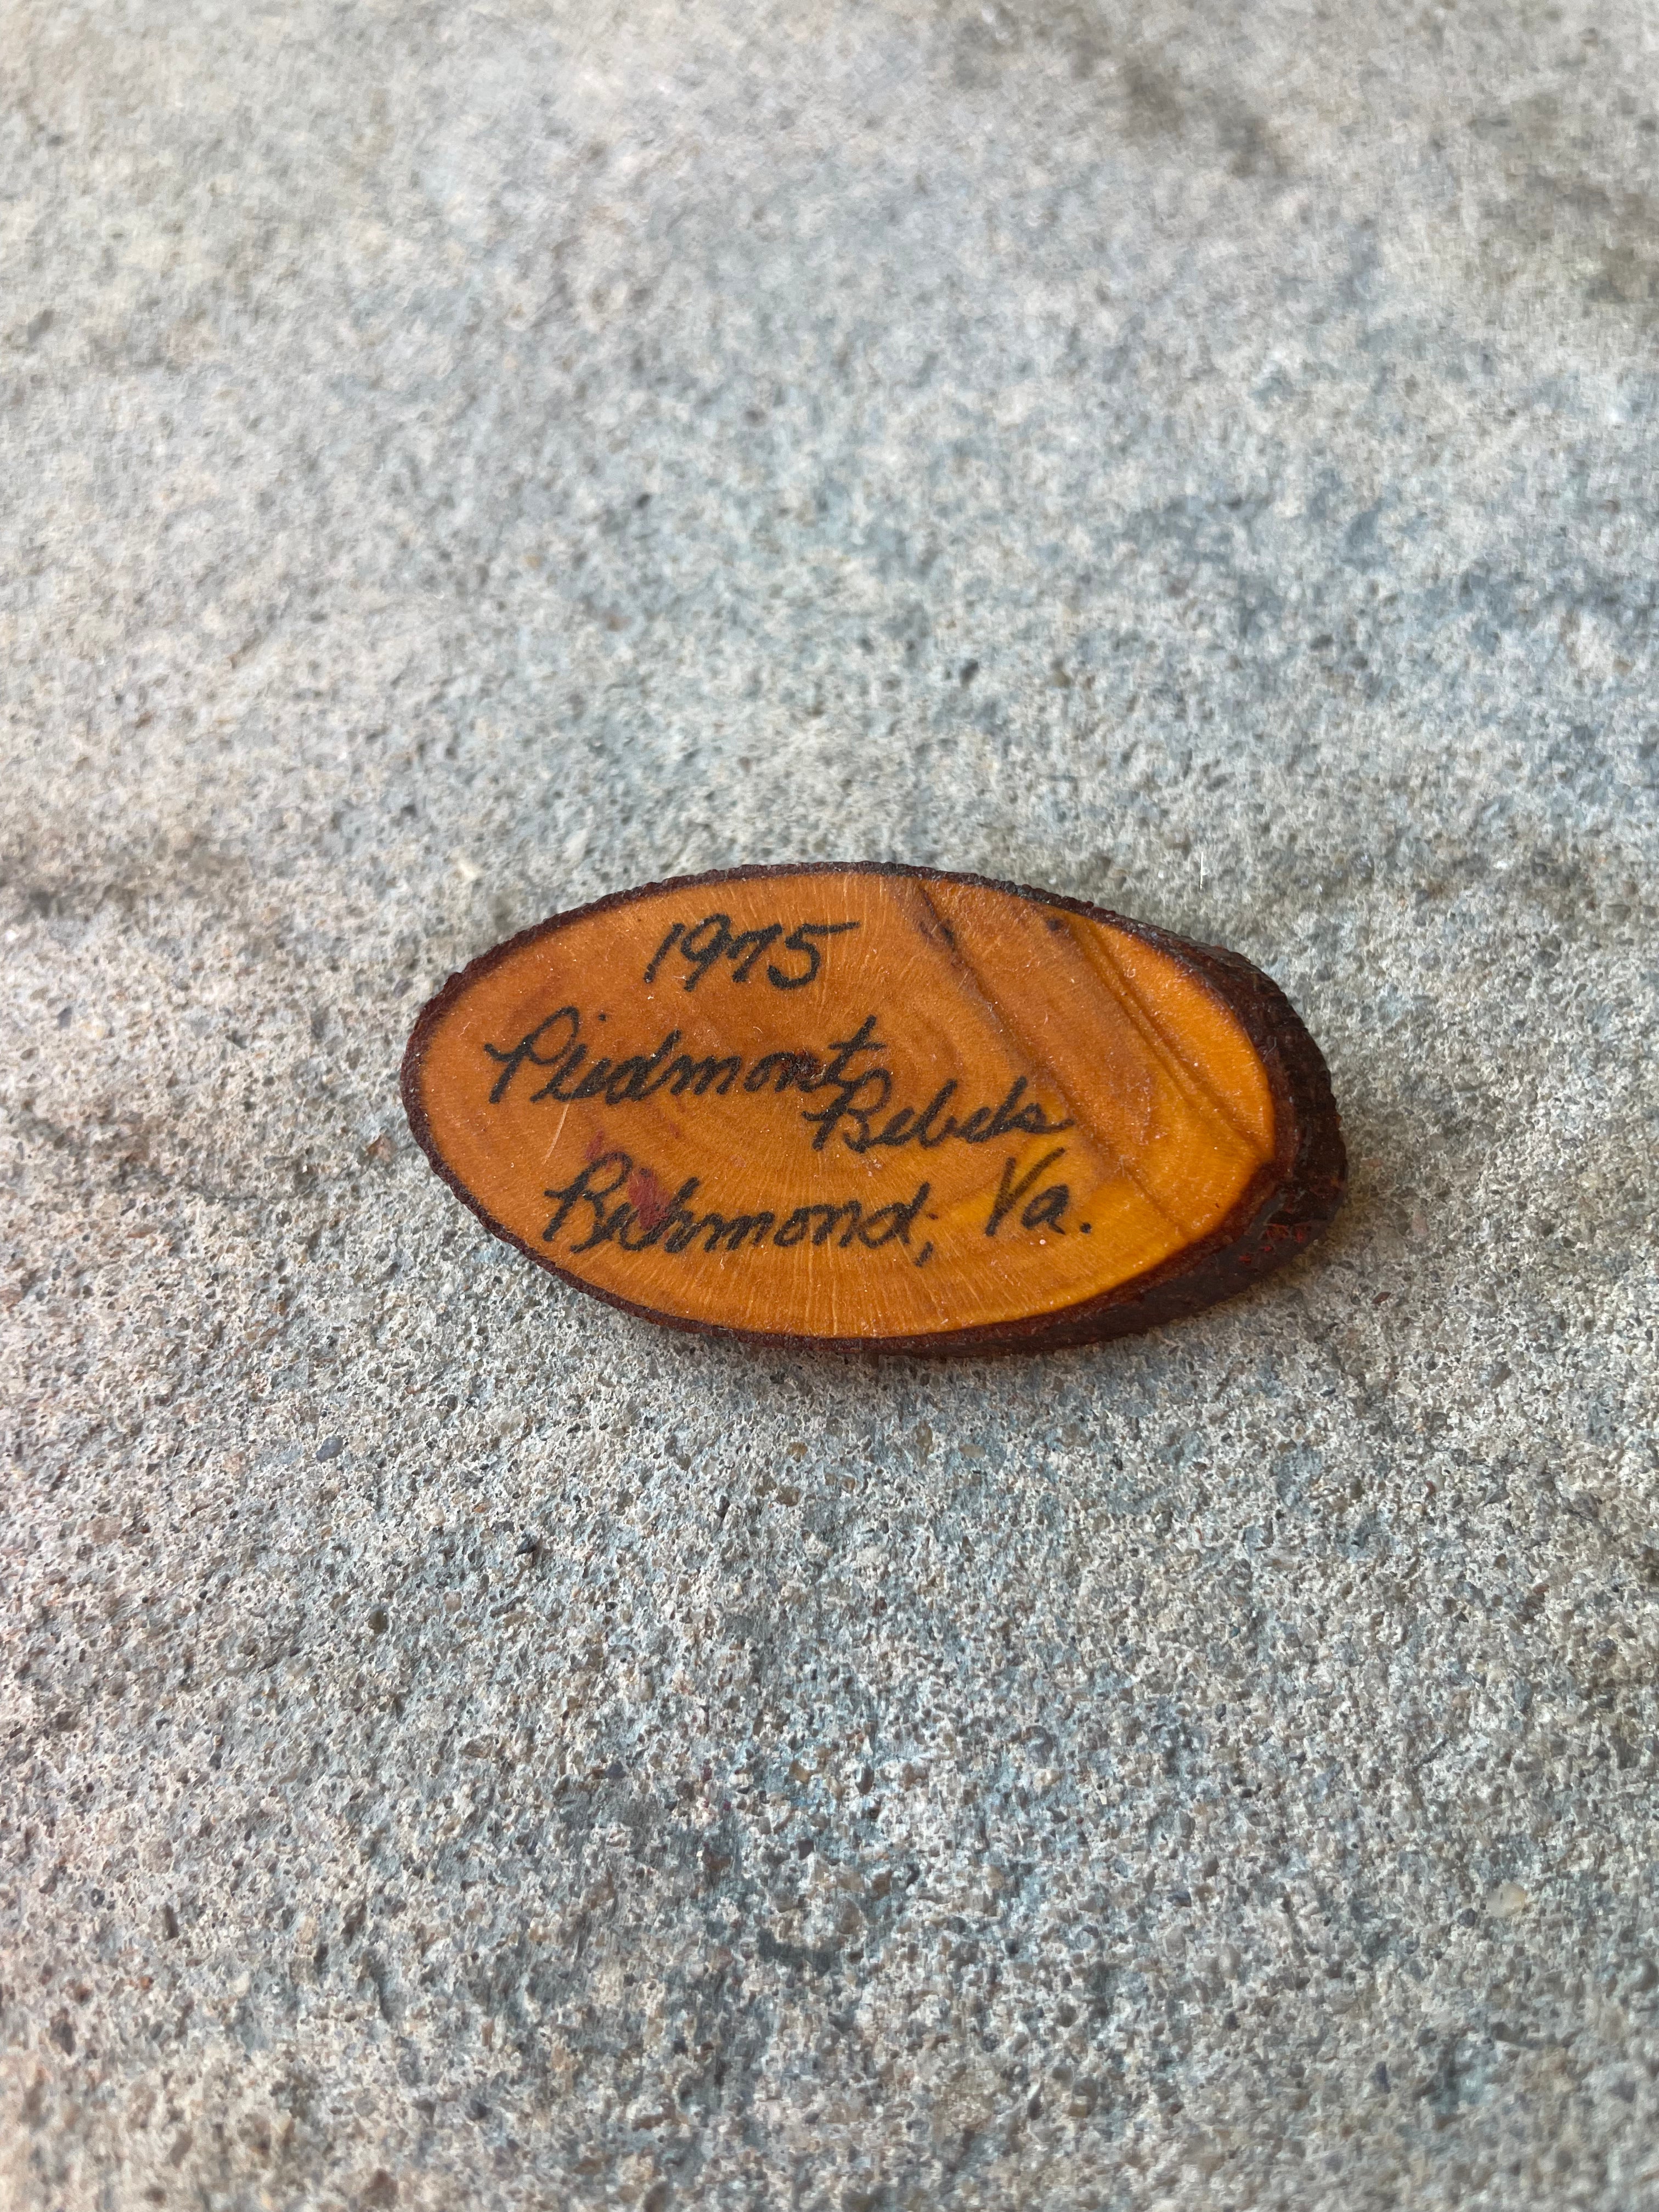 Wooden 1975 Pin